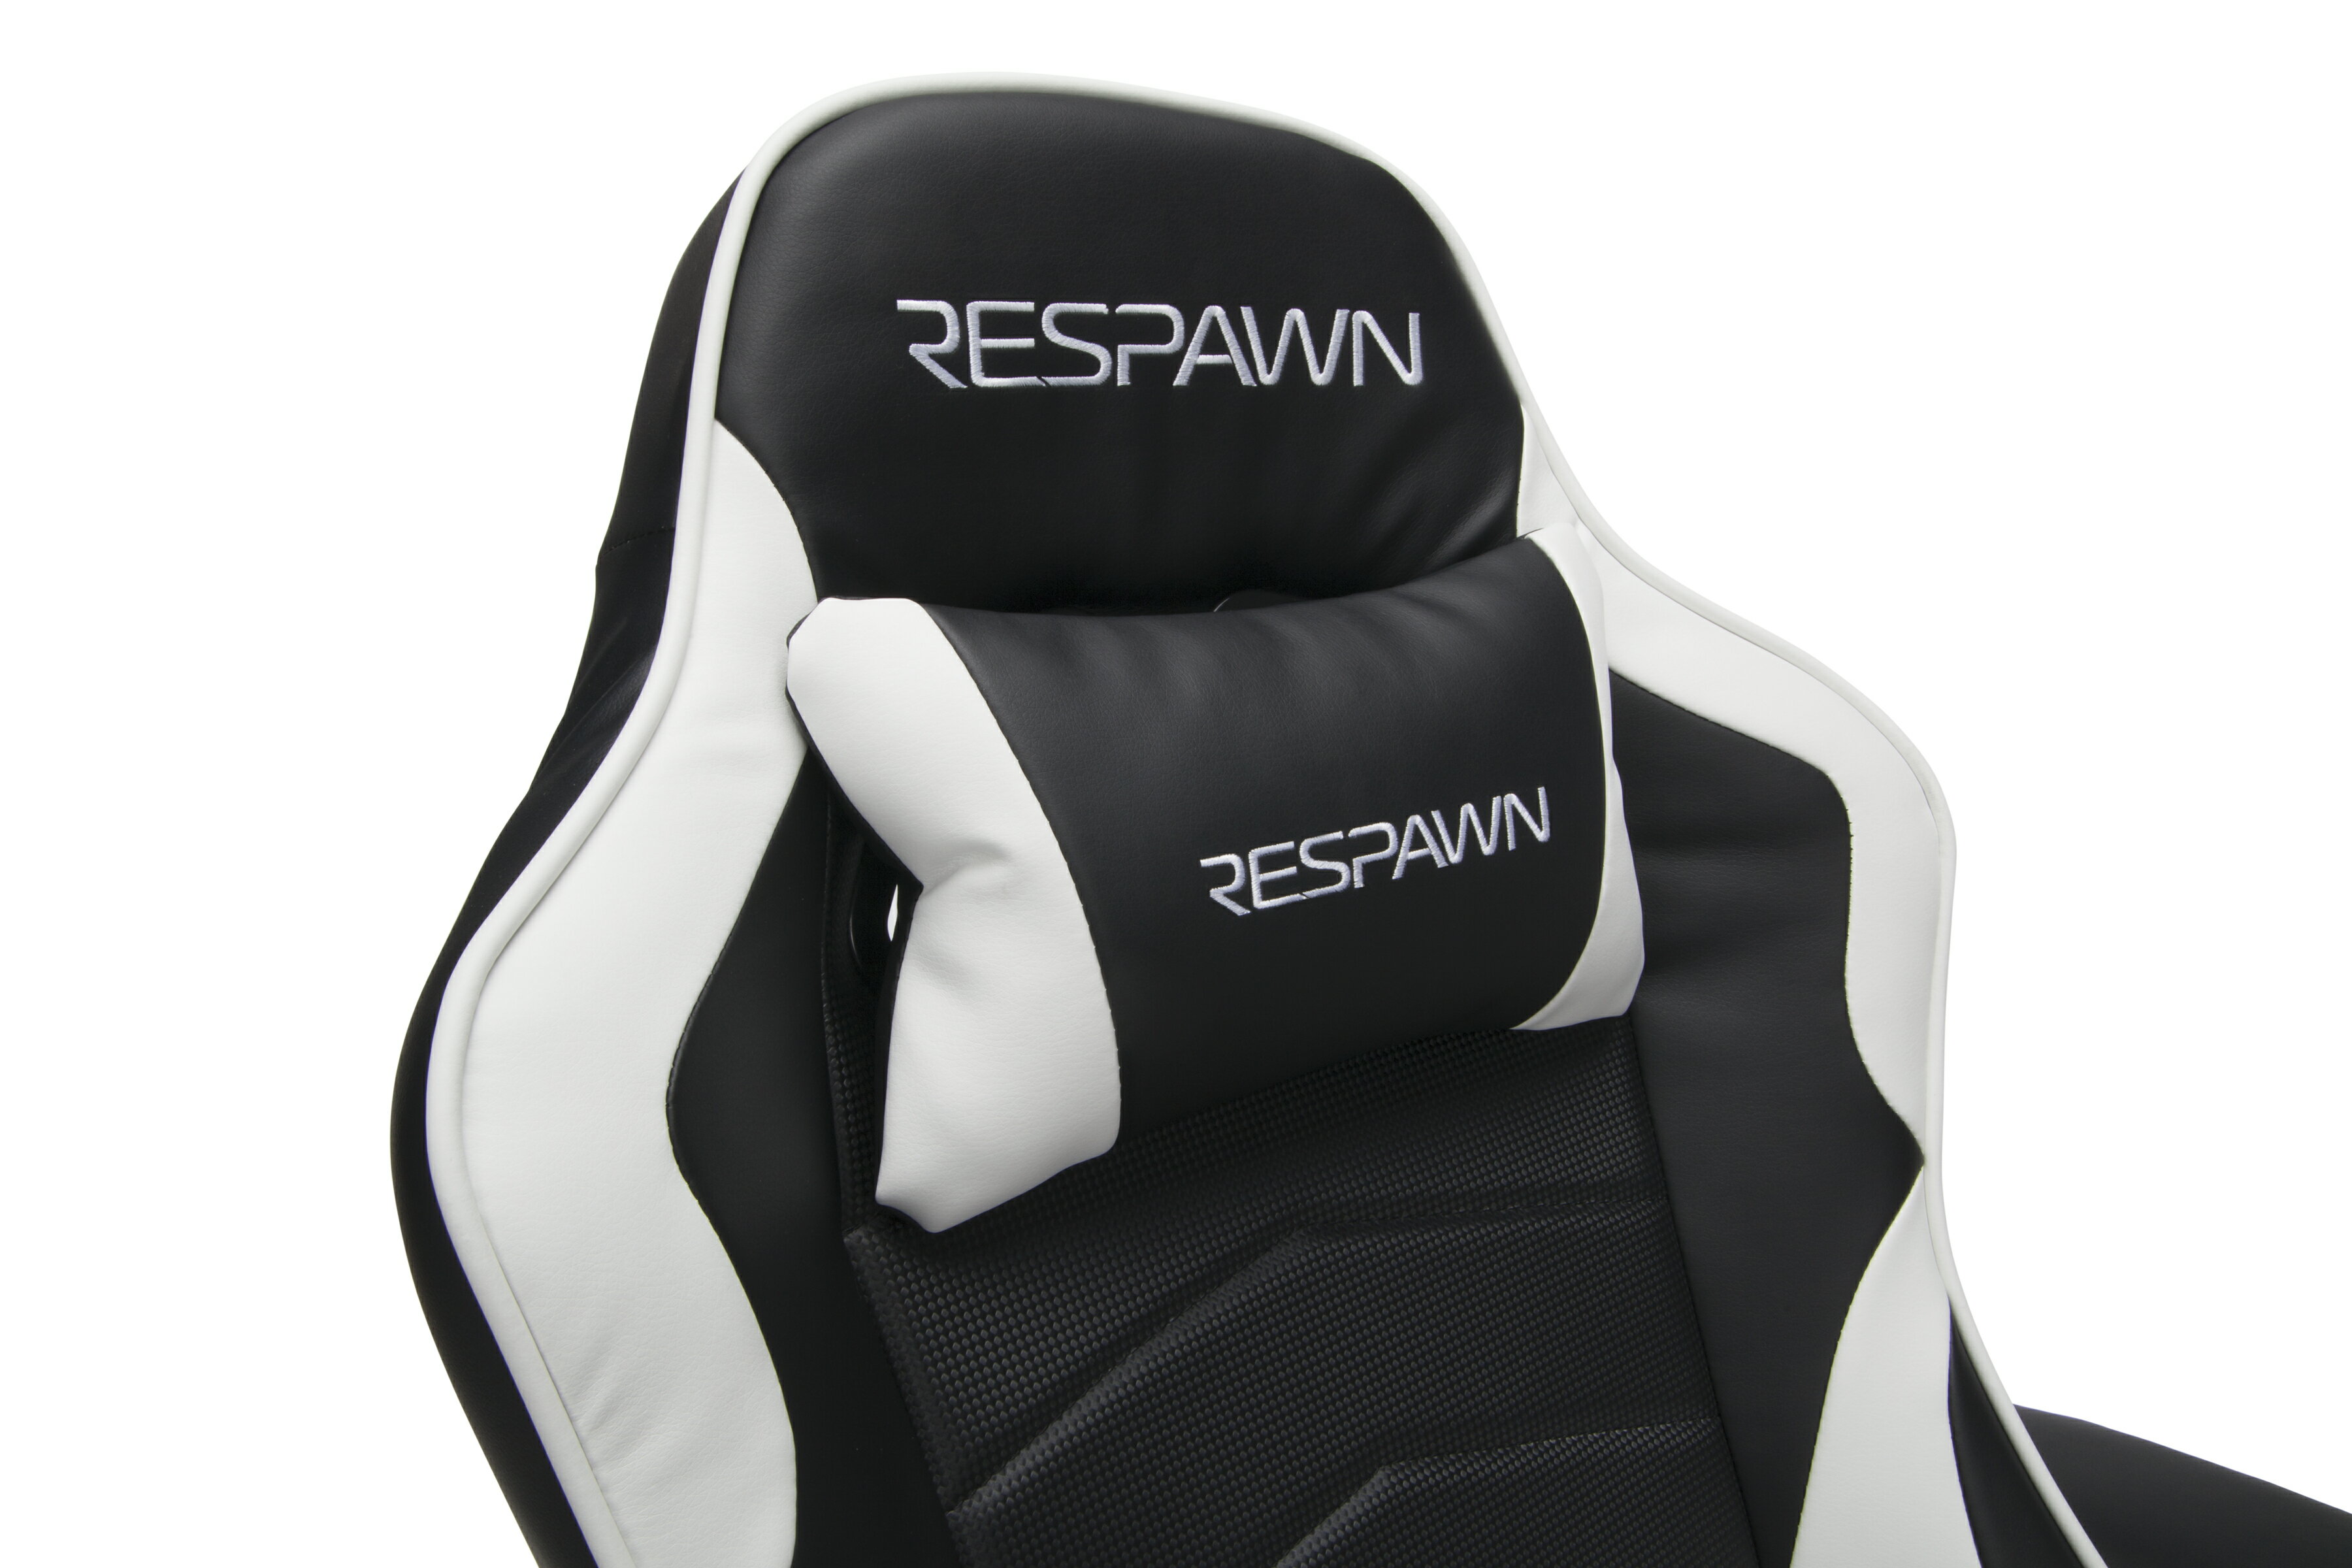 Office Essentials: RESPAWN-900 Racing Style Gaming Recliner, Reclining